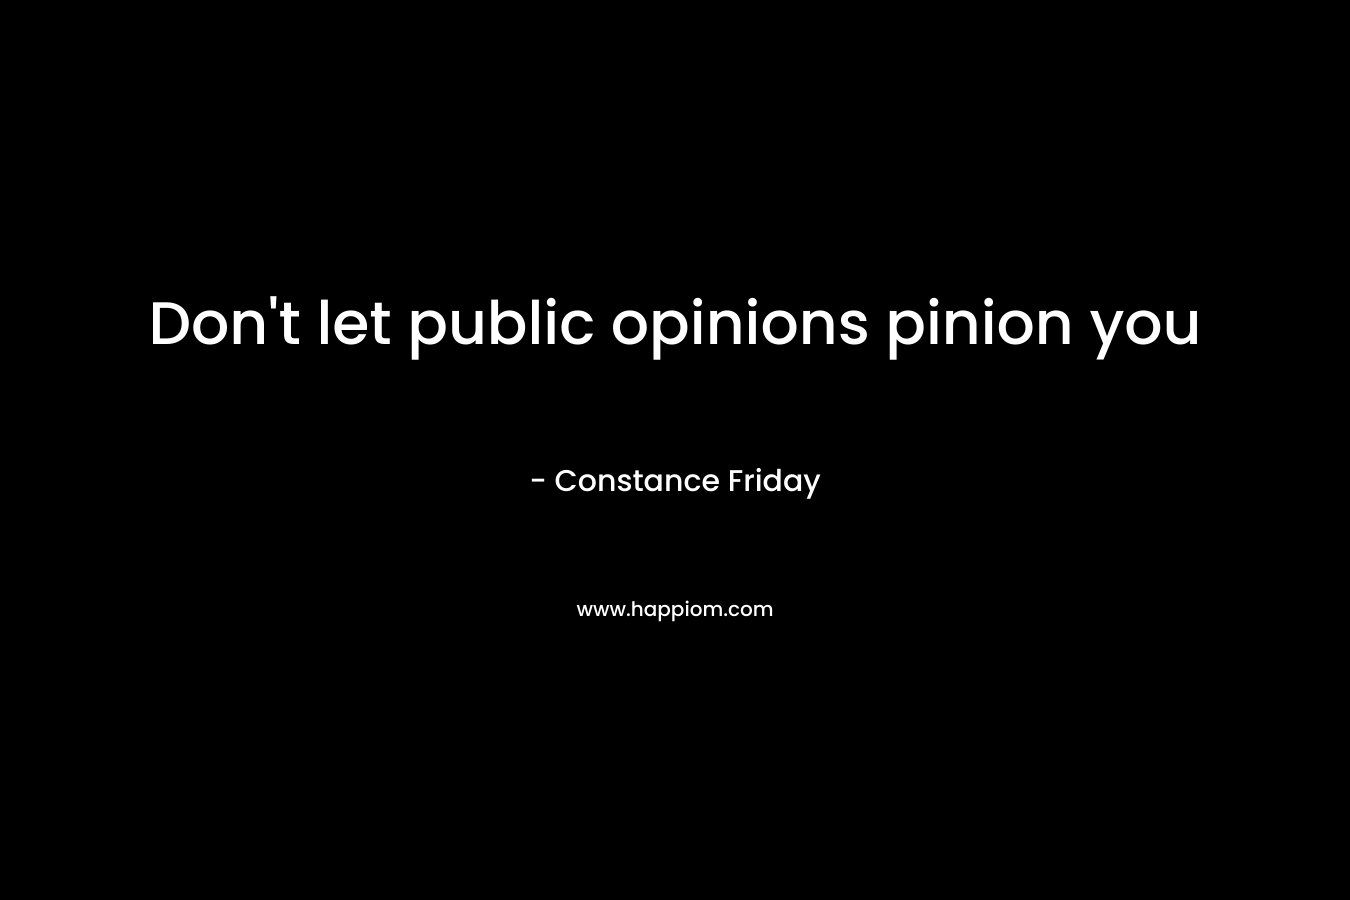 Don't let public opinions pinion you